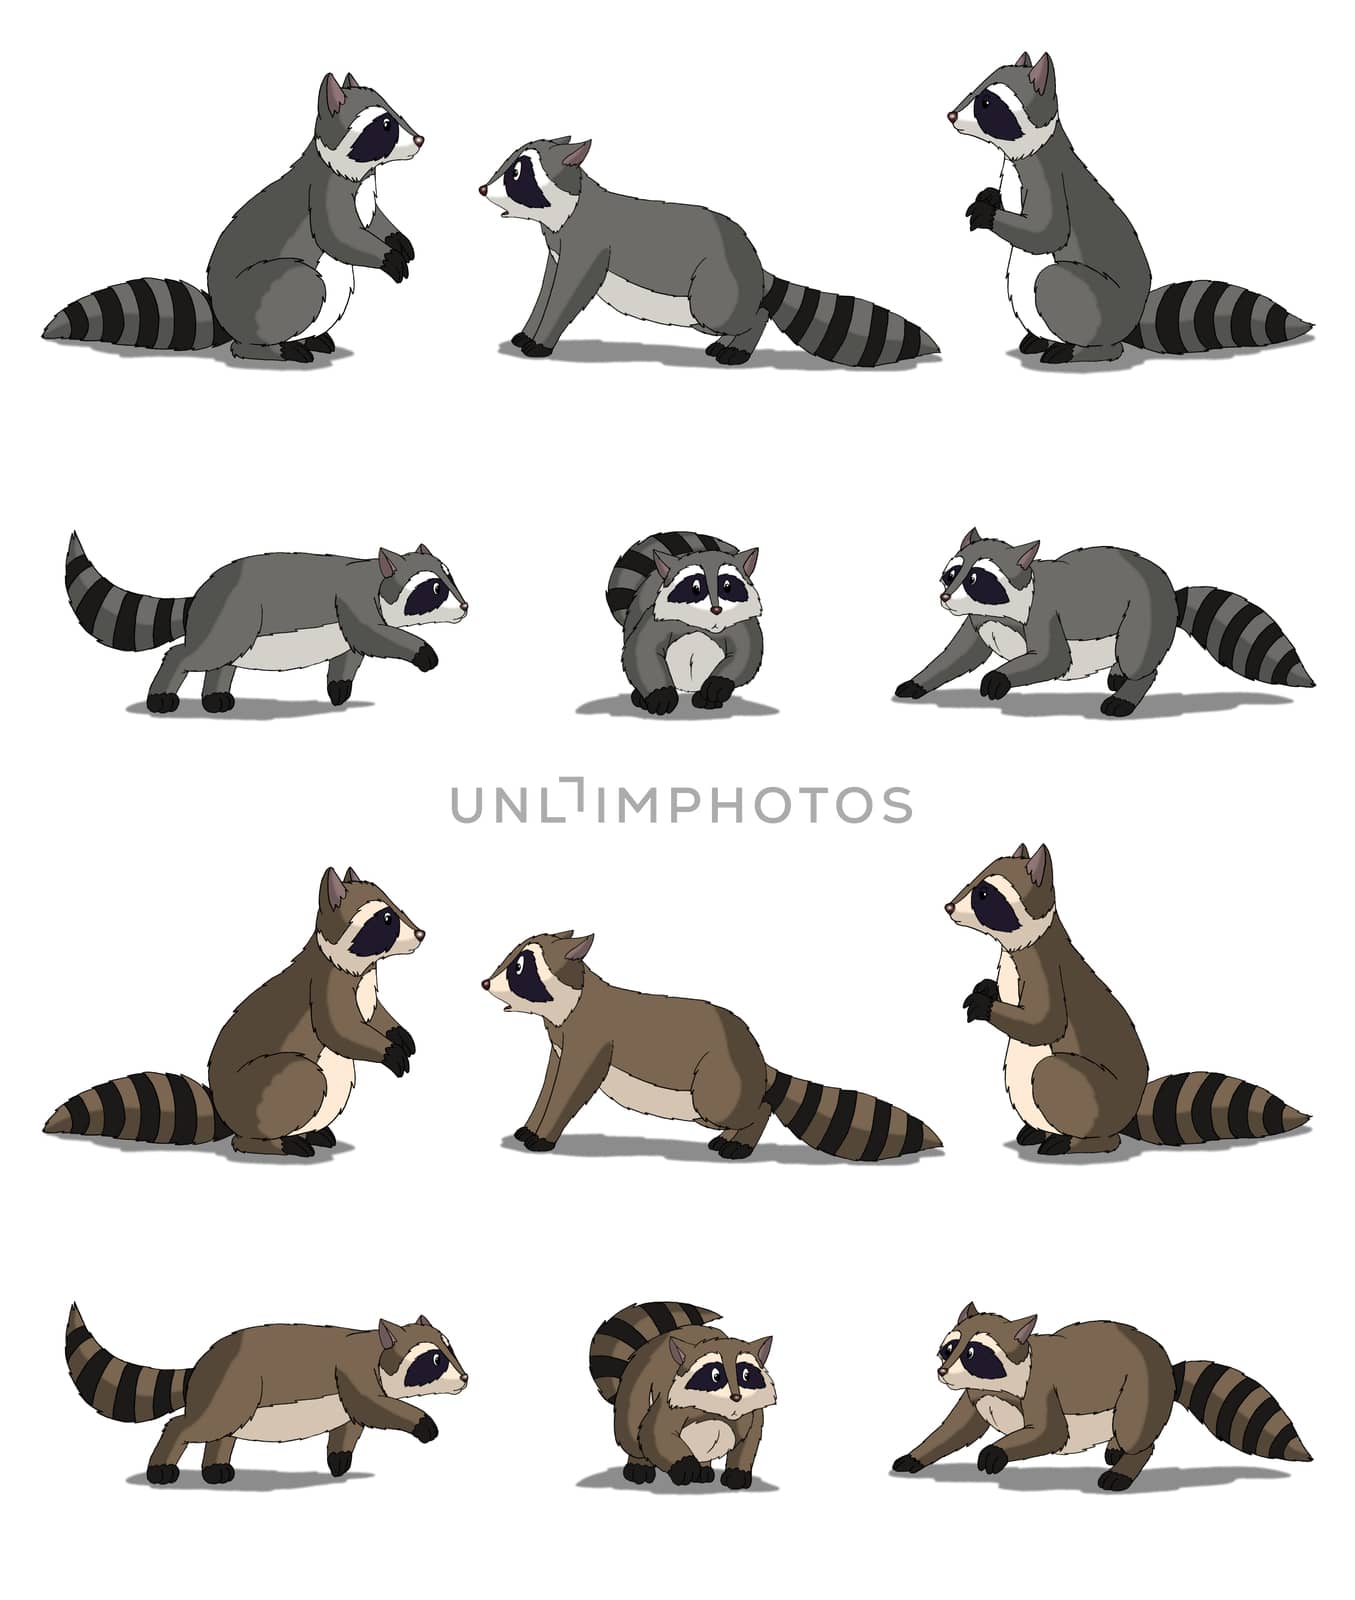 Set of Raccoon images. Digital painting  full color cartoon style illustration isolated on white background.